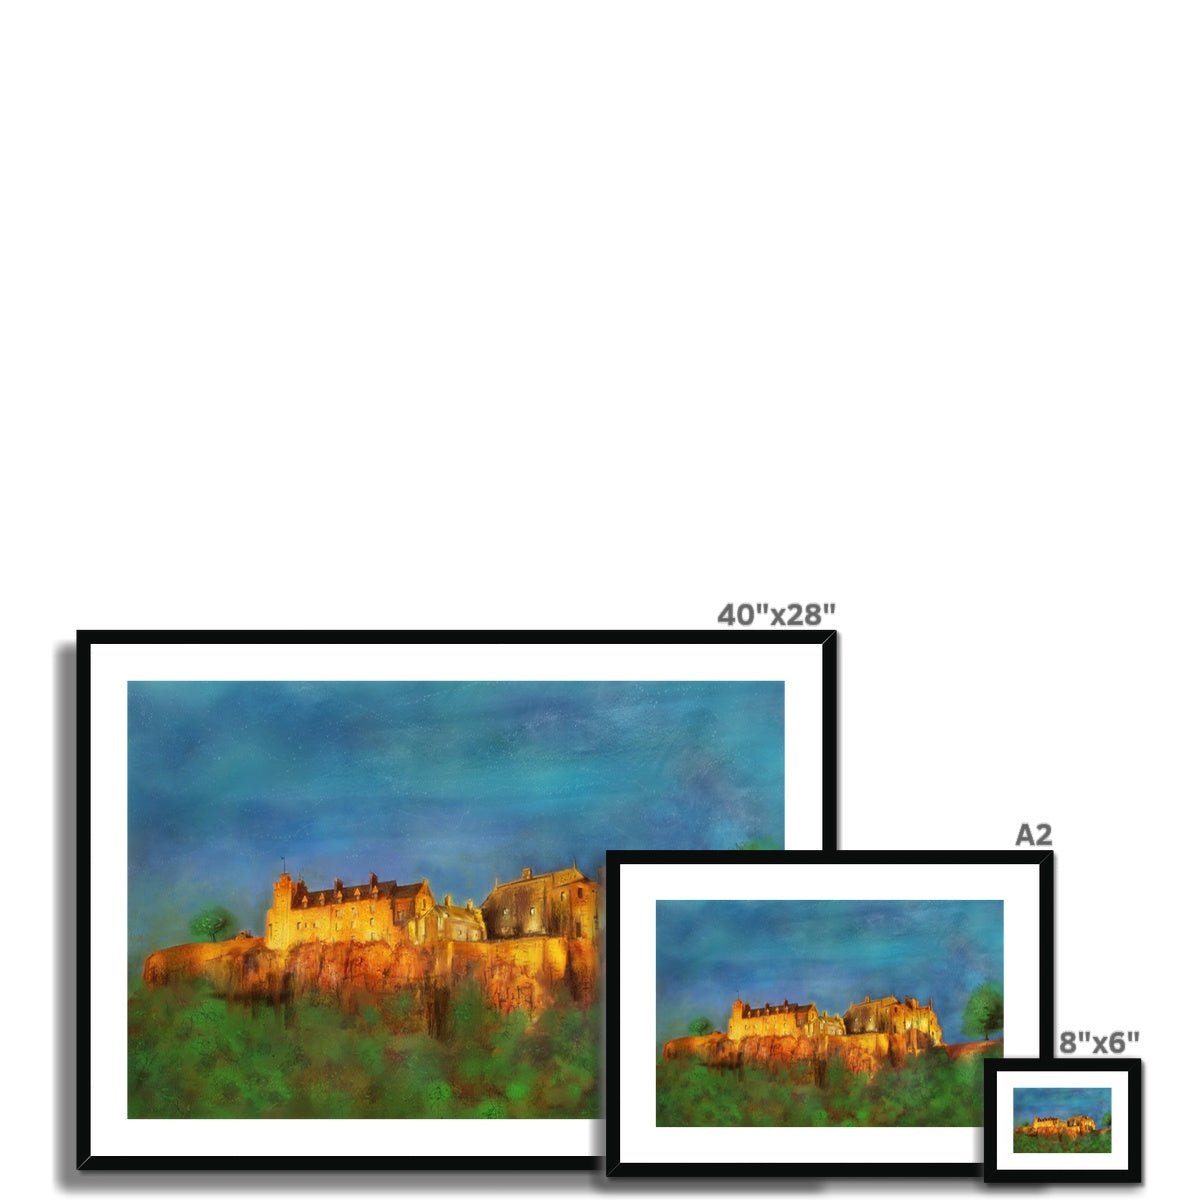 Stirling Castle Painting | Framed & Mounted Prints From Scotland-Framed & Mounted Prints-Historic & Iconic Scotland Art Gallery-Paintings, Prints, Homeware, Art Gifts From Scotland By Scottish Artist Kevin Hunter